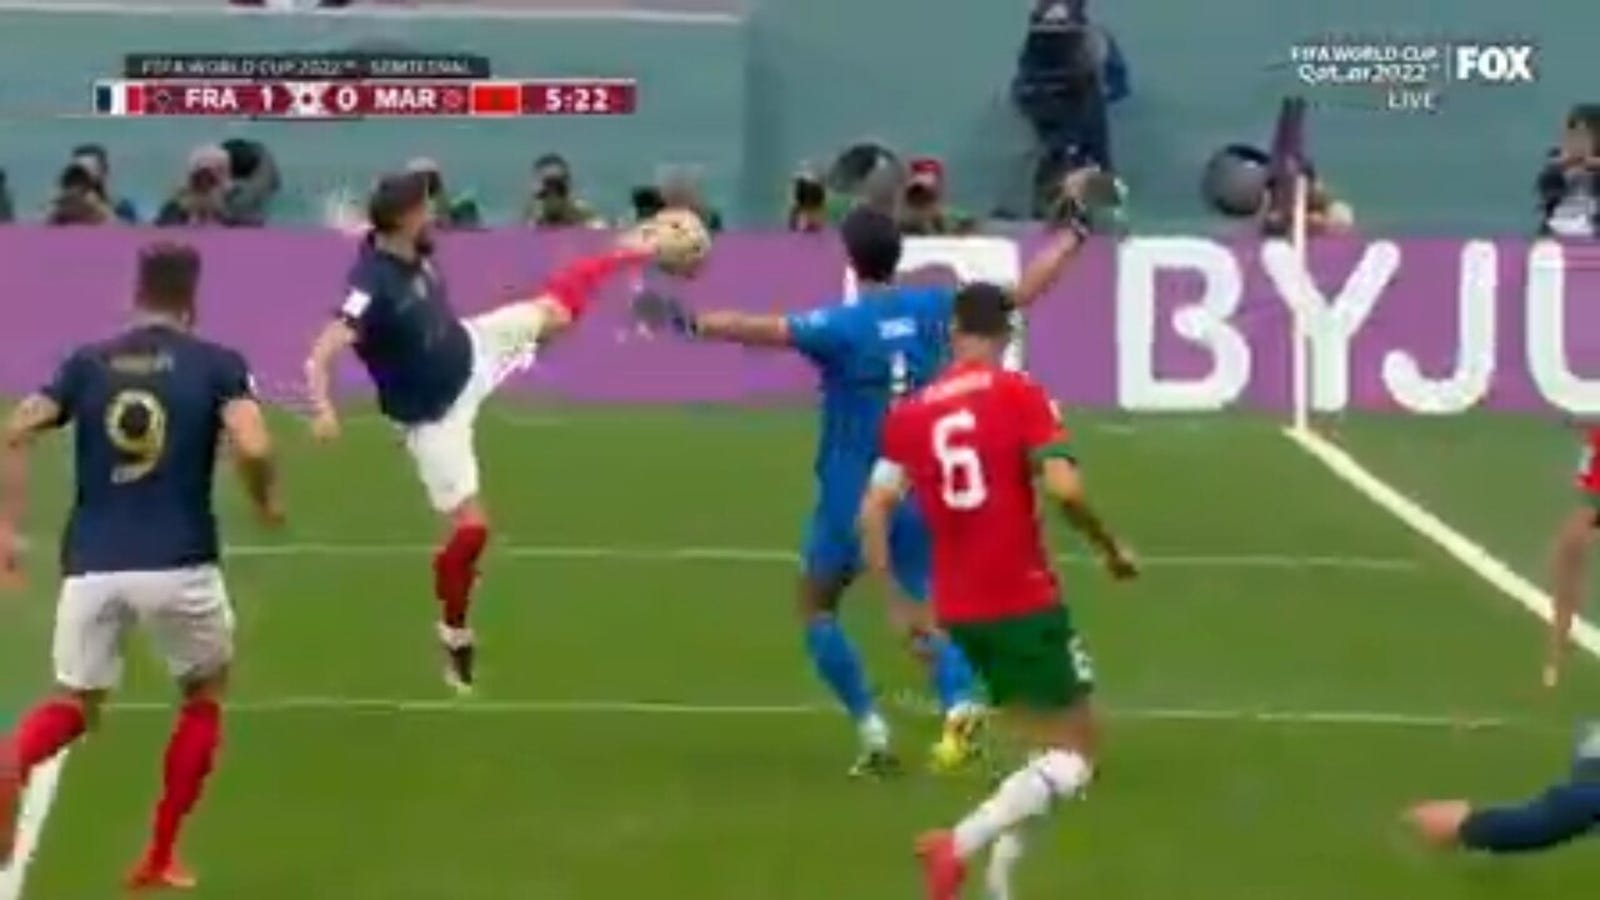 France's Theo Hernandez scores against Morocco in the 5'